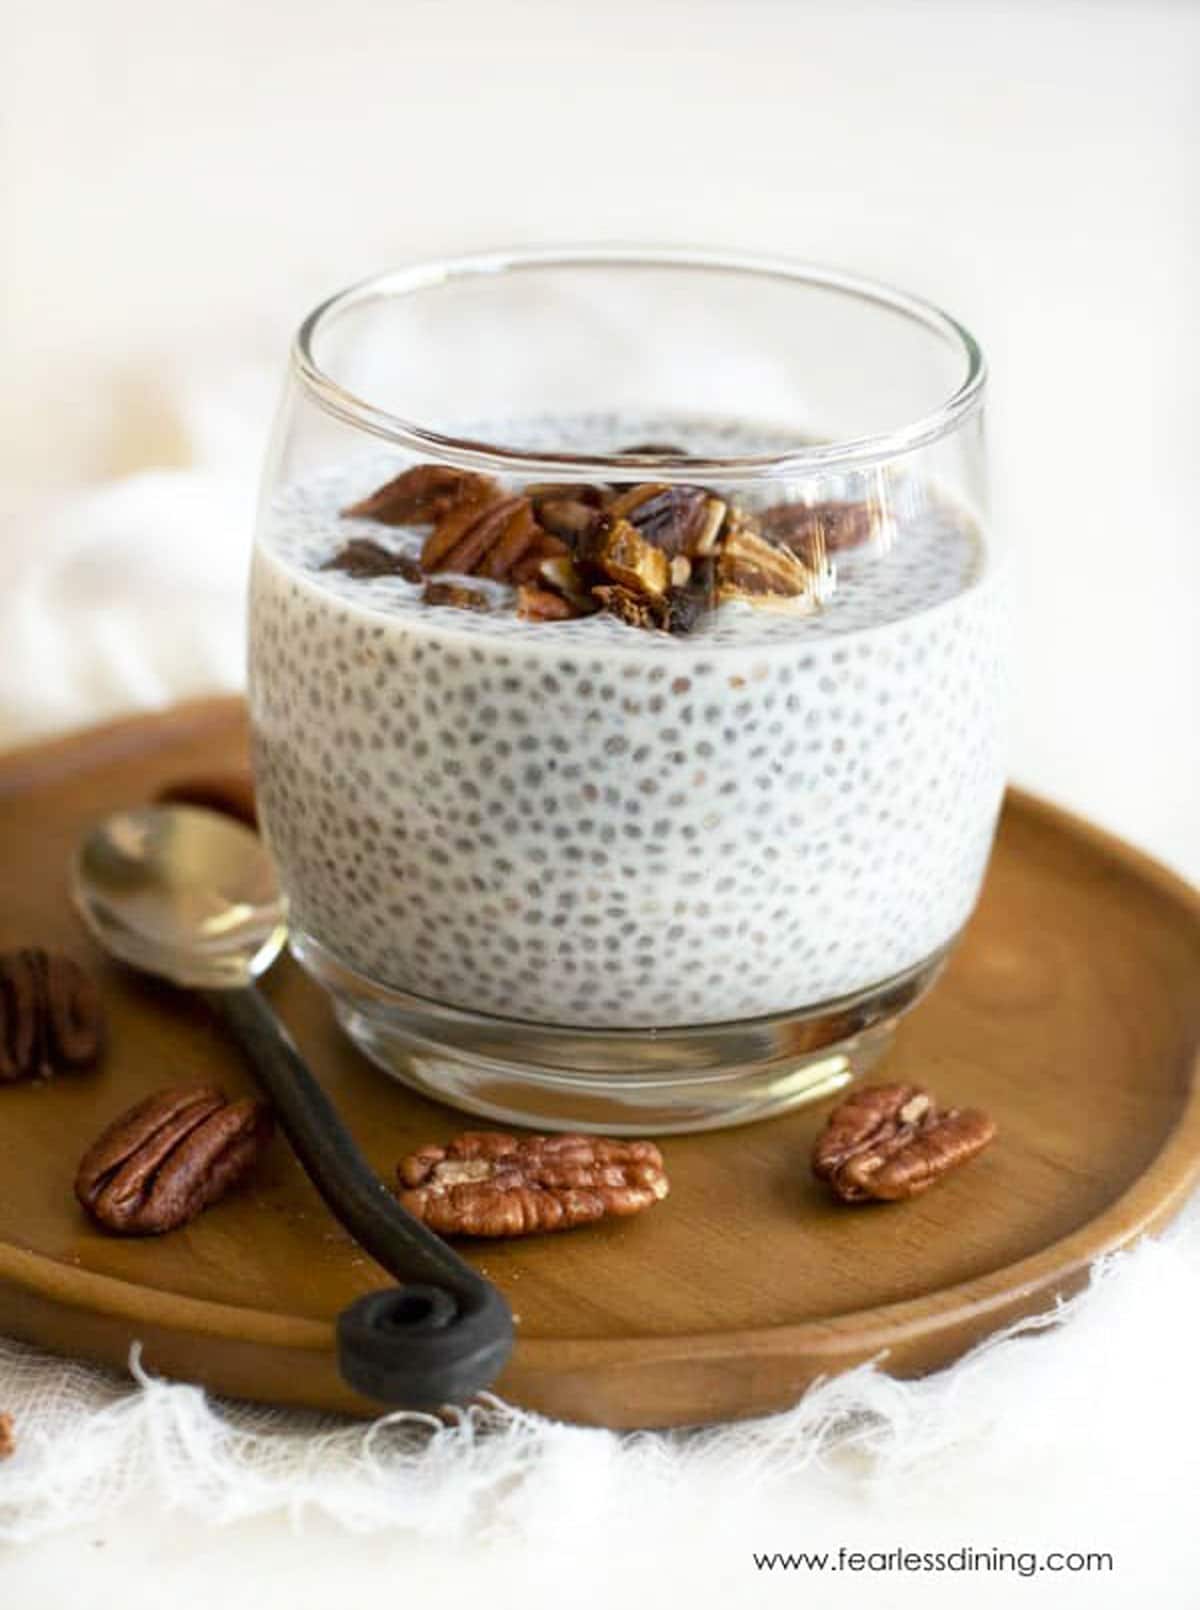 A glass full of chia pudding. The glass is on a small wooden plate.